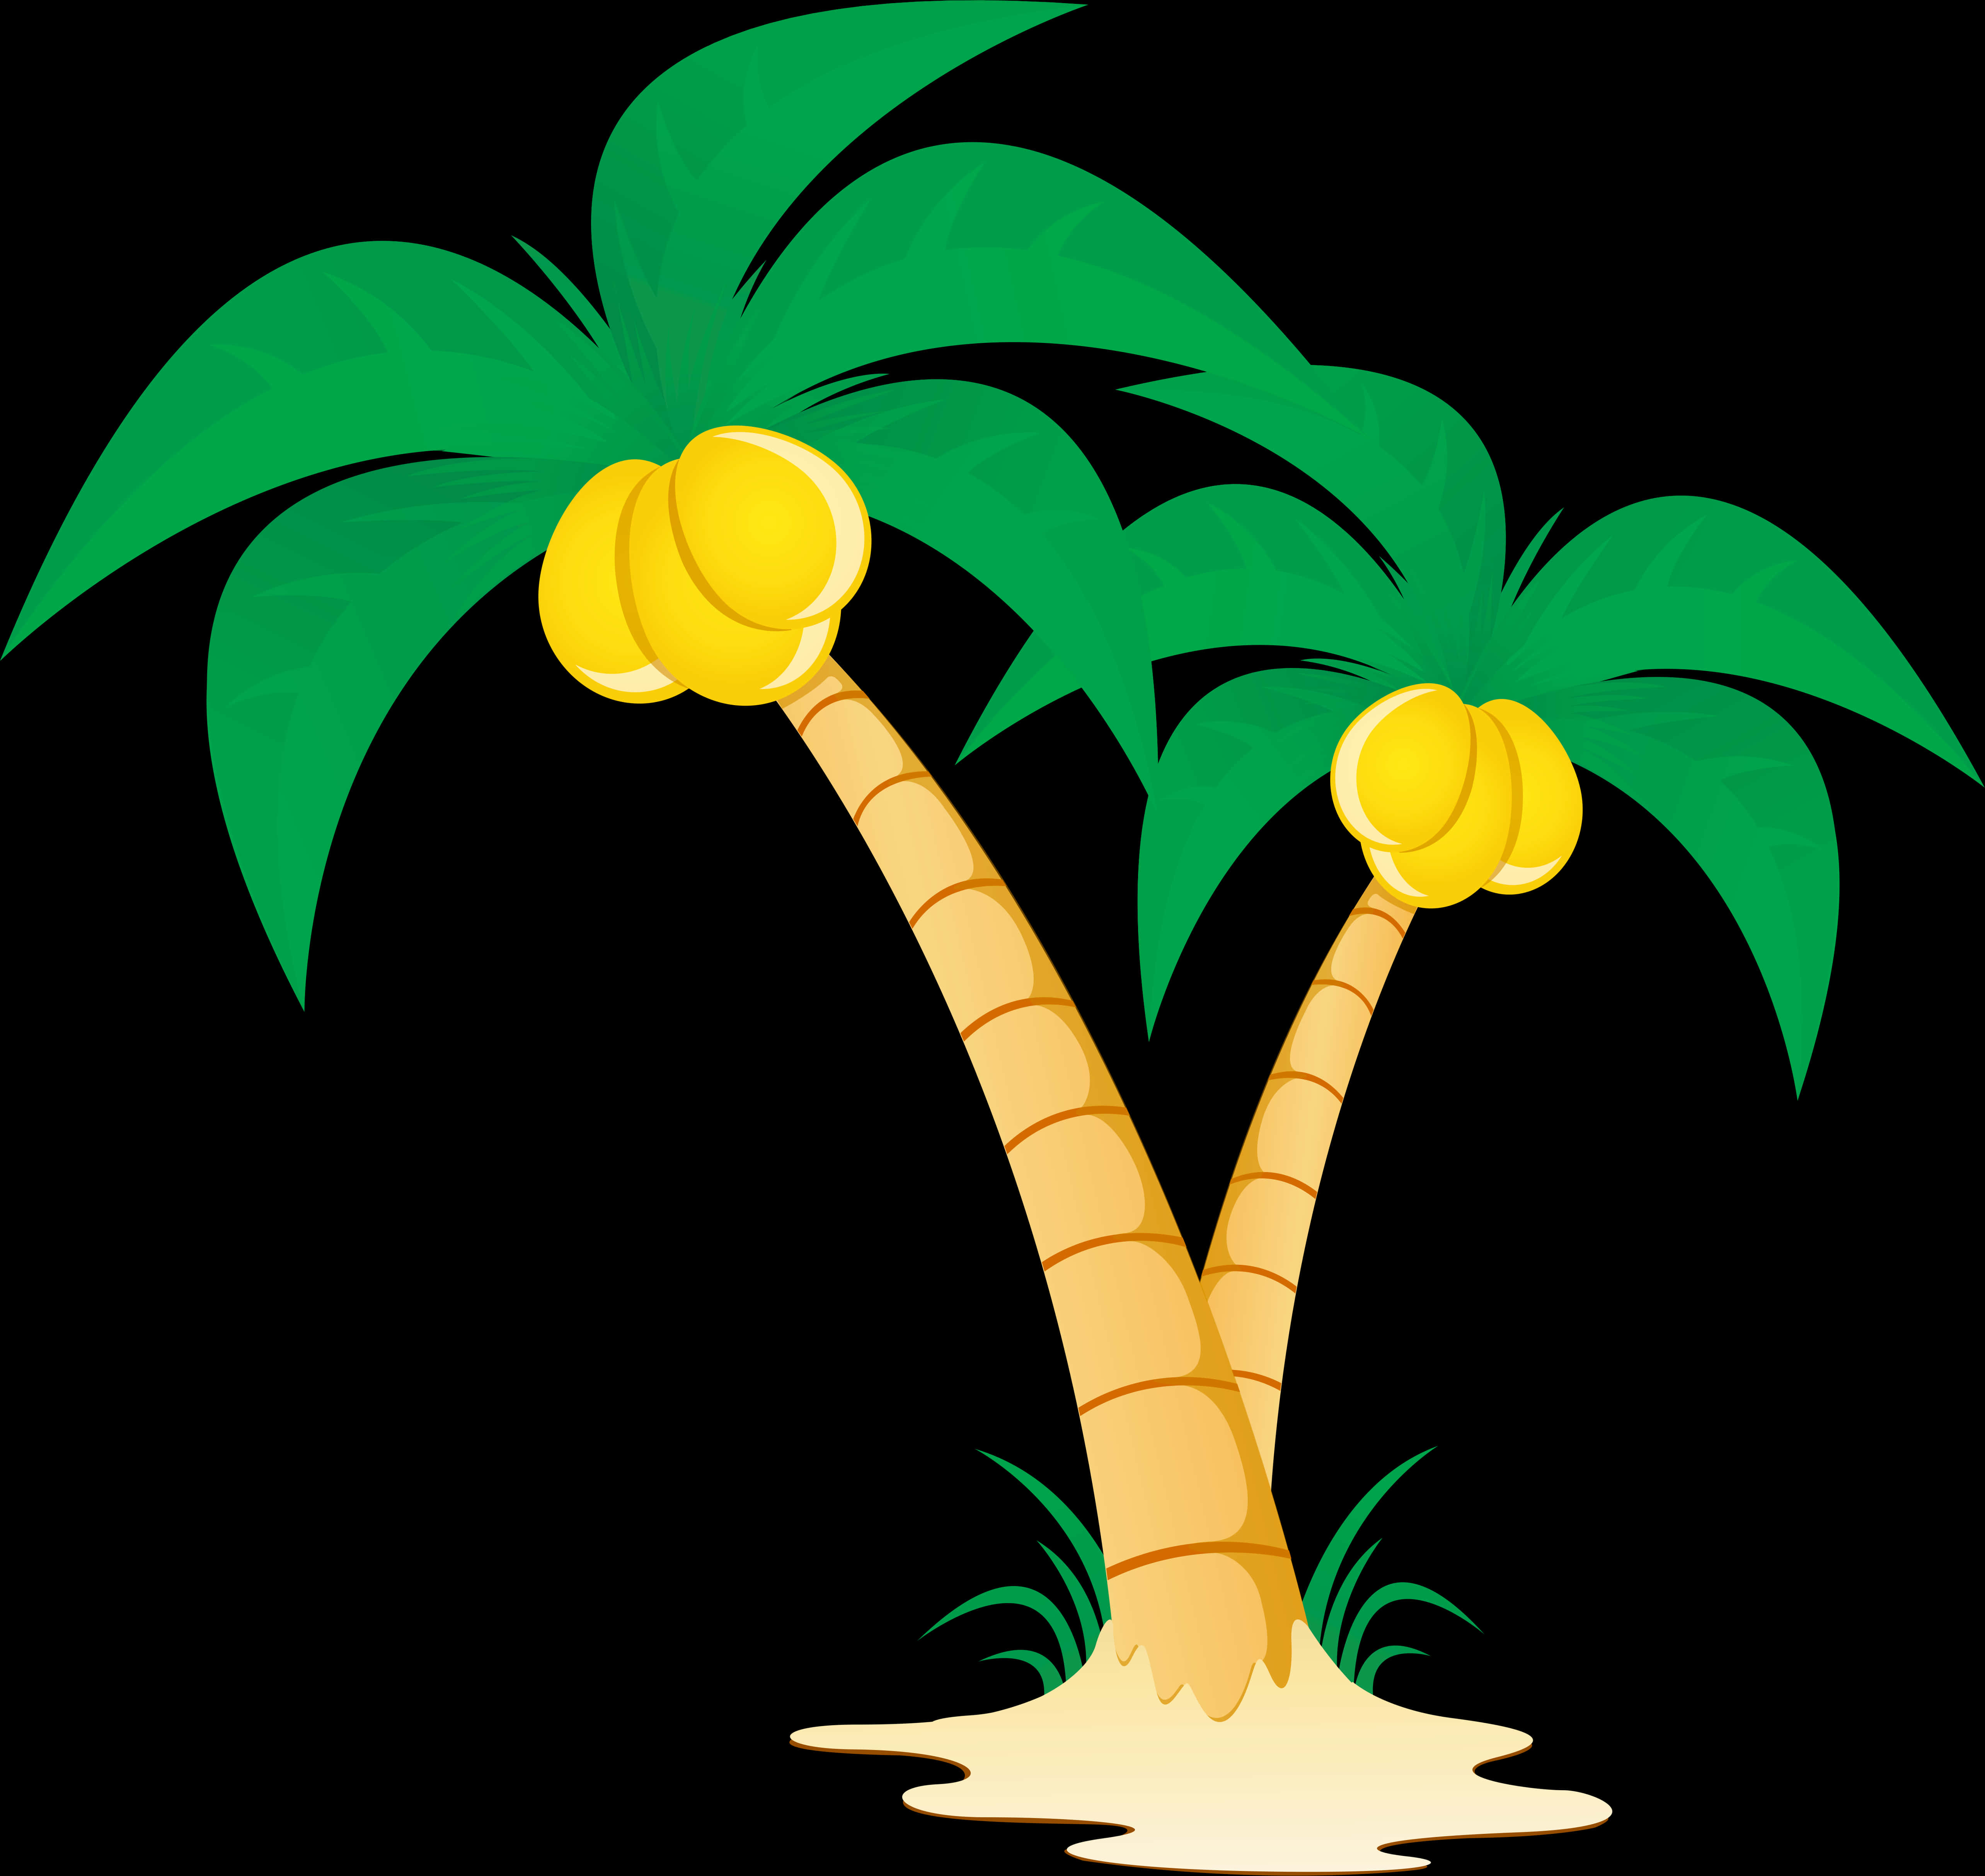 A Palm Trees With Fruits On Them